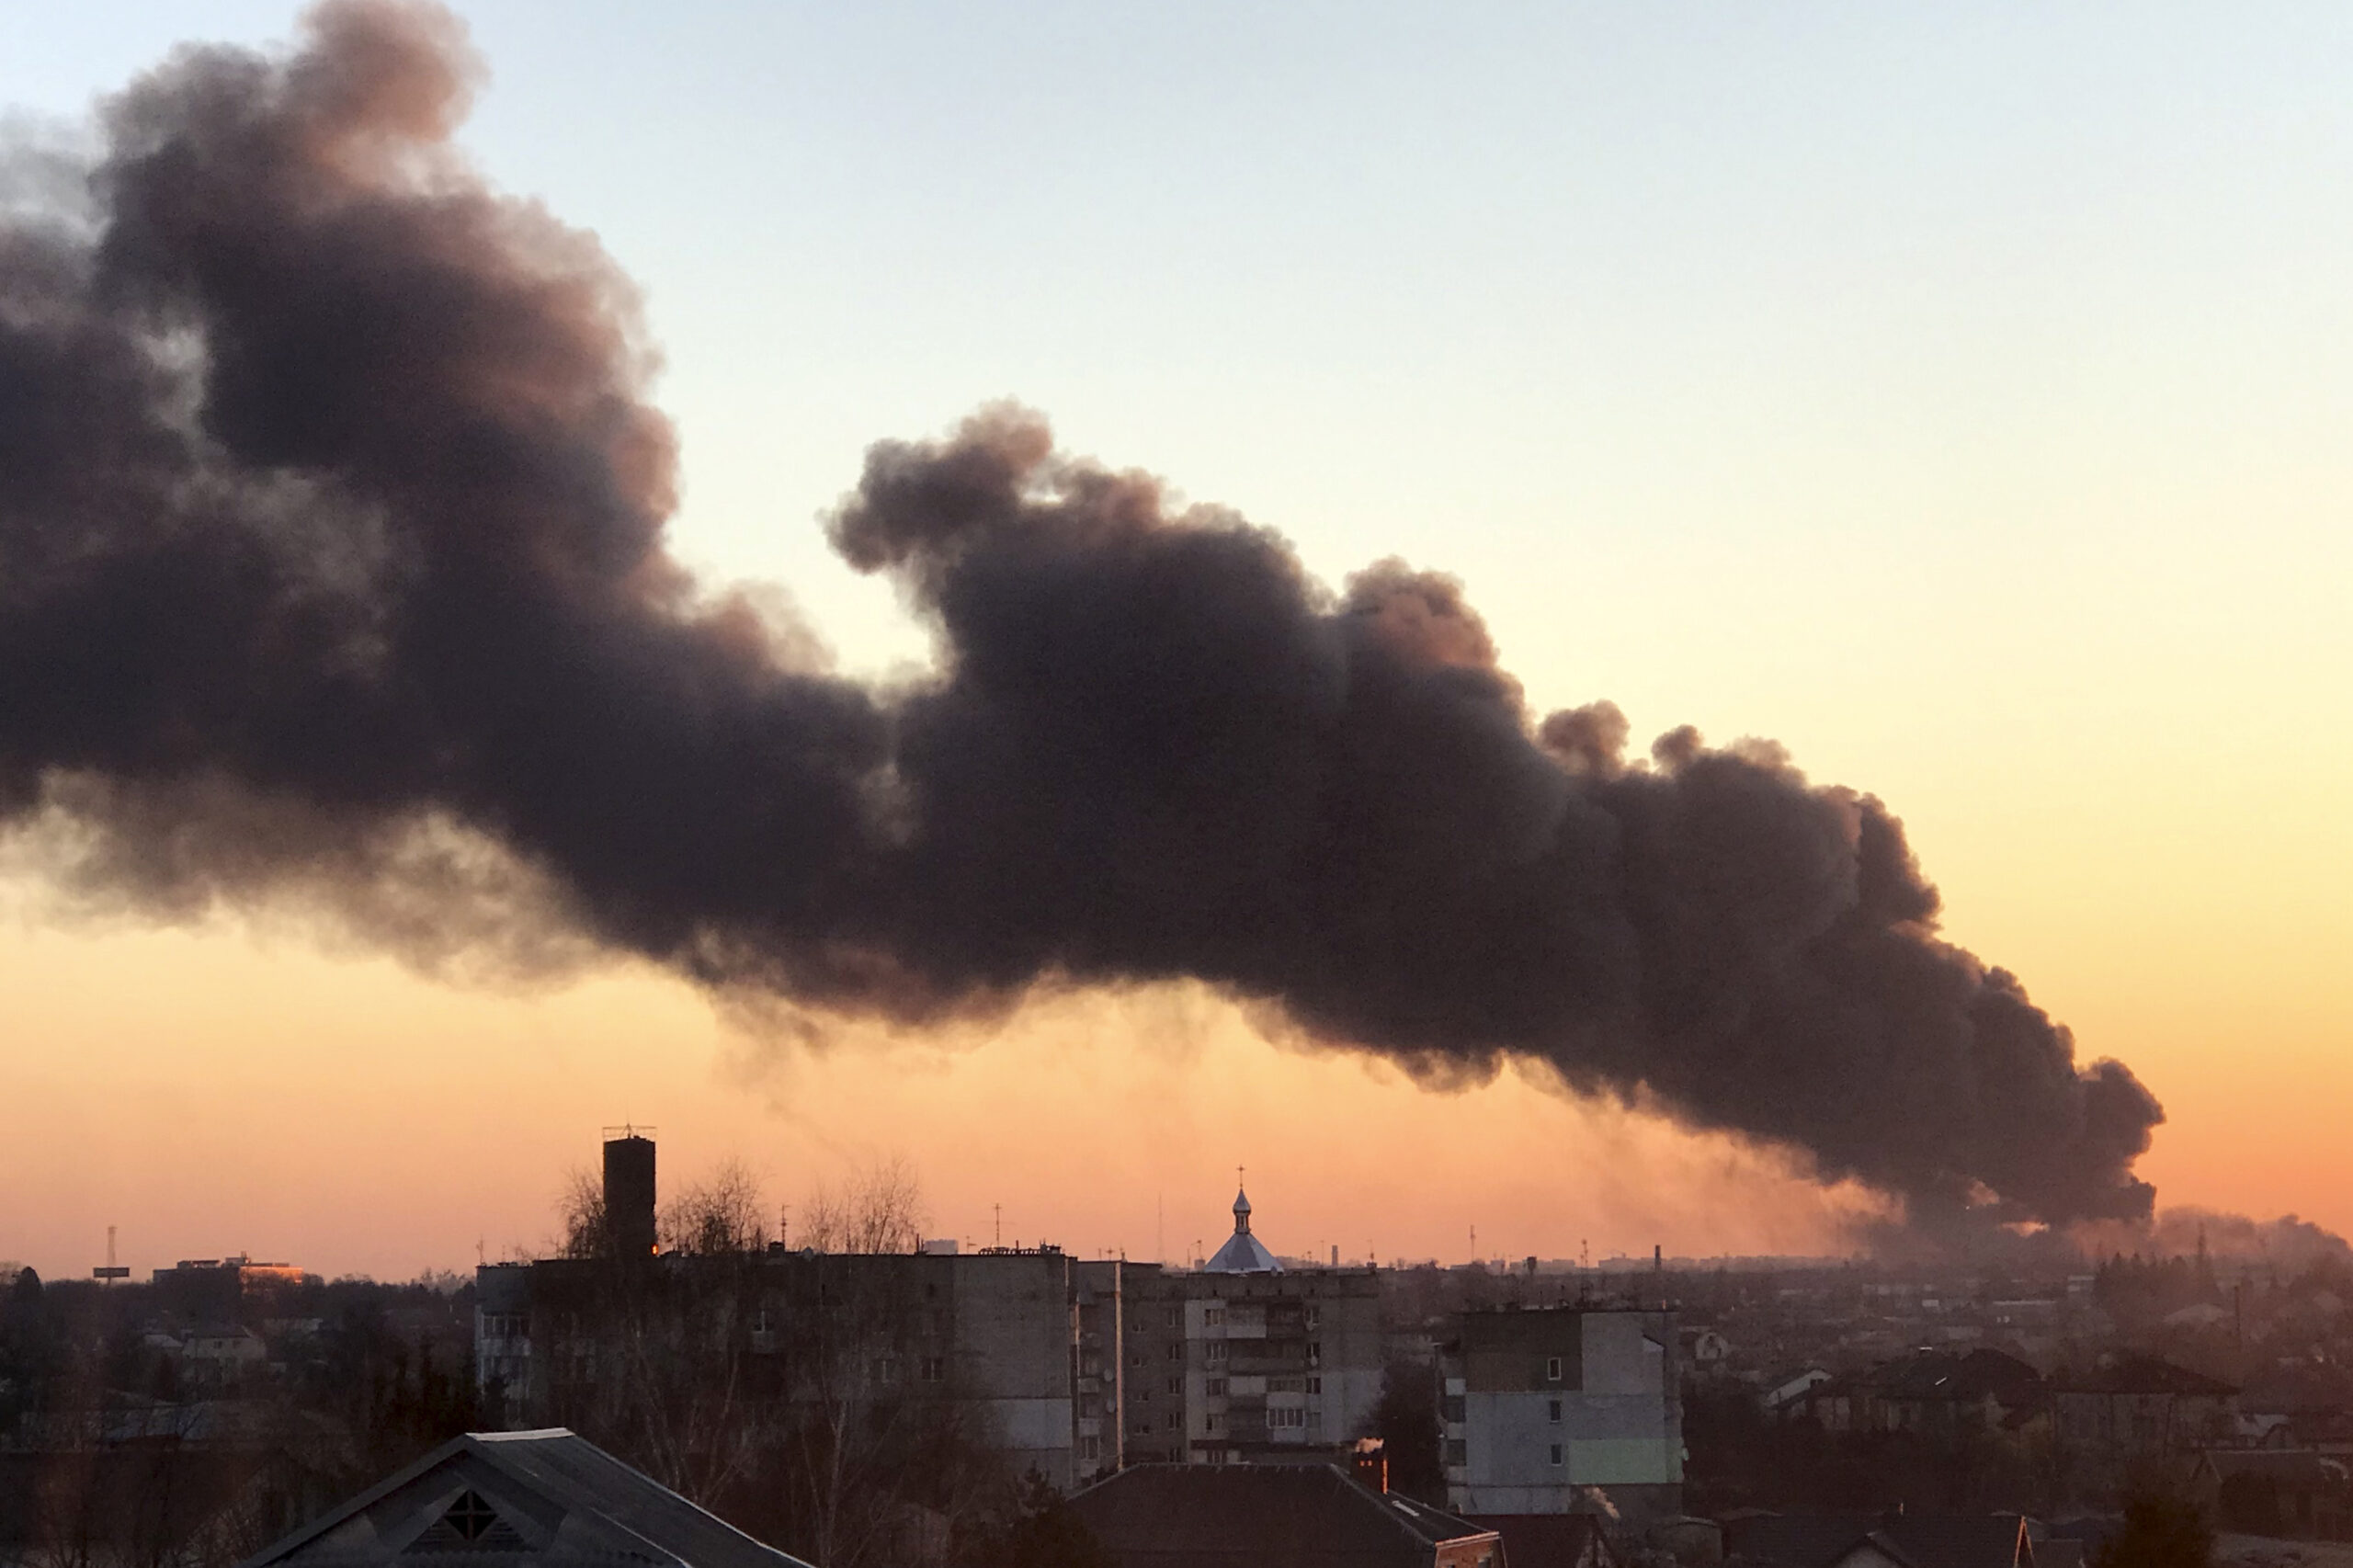 FILE - A cloud of smoke rises after an explosion in Lviv, western Ukraine, March 18, 2022. Until the missiles struck within walking distance of the cathedrals and cafes downtown, Ukraine’s cultural capital was a city that could feel distant from the war. (AP Photo, File)